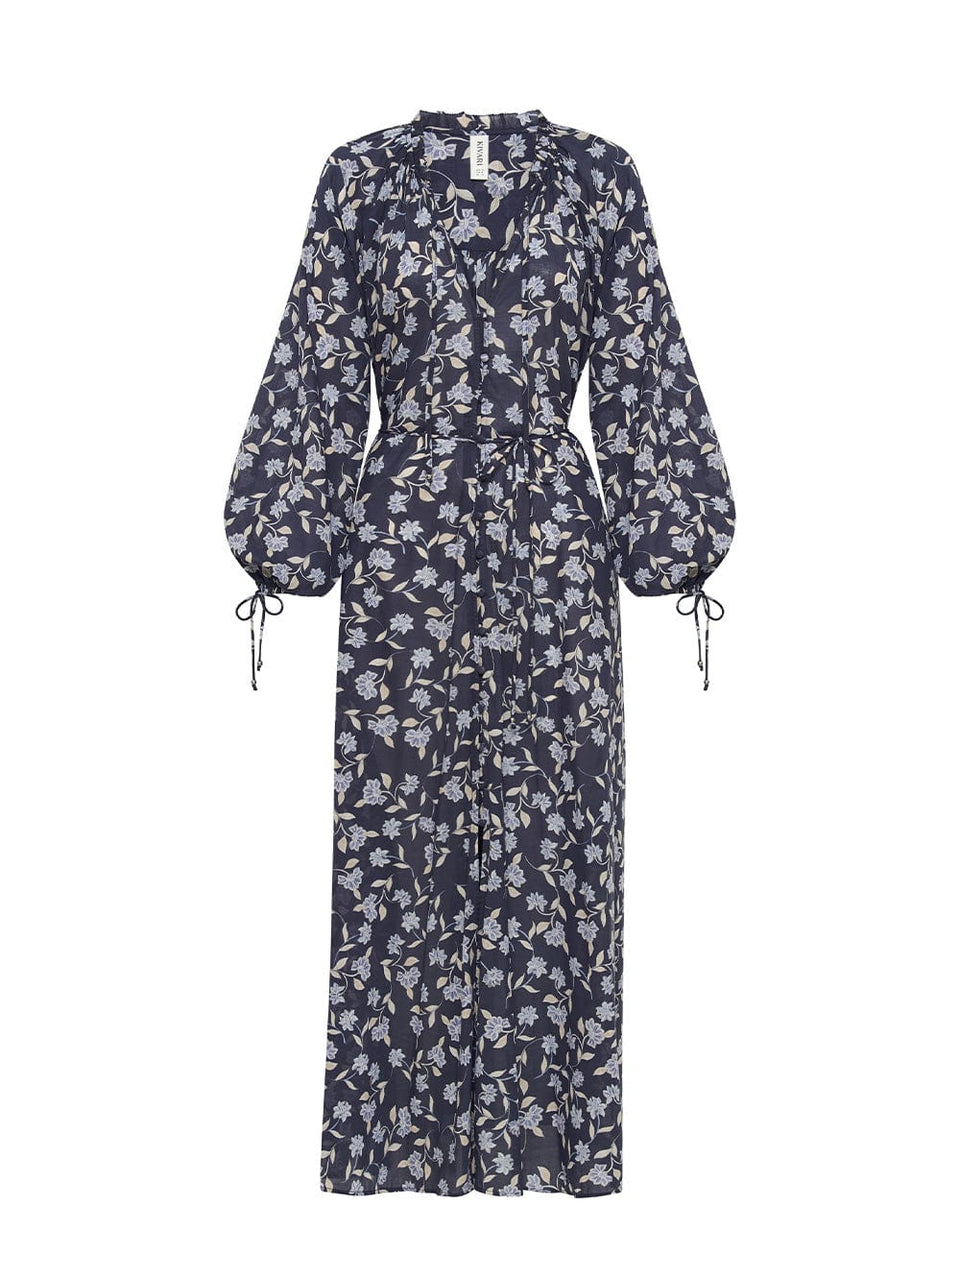 Ghost image of KIVARI Jeanne Maxi Dress: A navy and sky blue floral dress made from cotton and featuring a button front, waist tie, full-length blouson sleeves and frill collar detail.